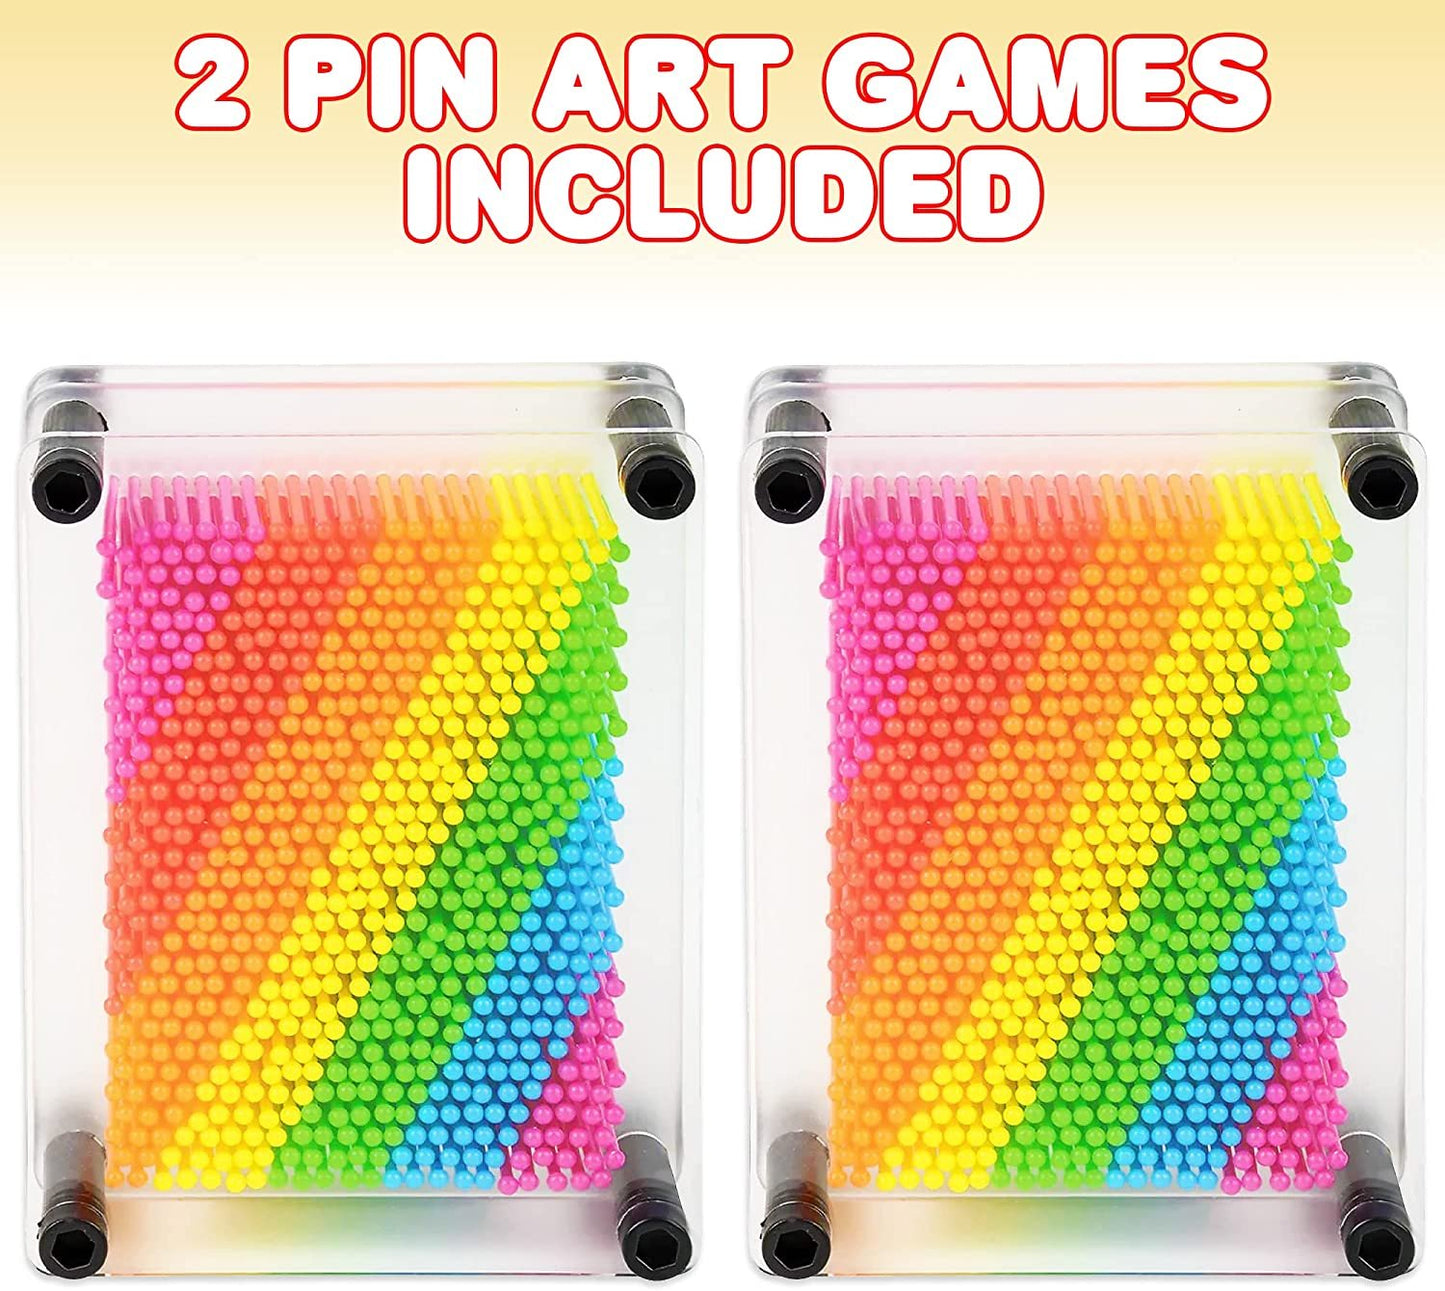 ArtCreativity Rainbow 3D Pin Art Toy, Set of 2 Colorful Plastic Pin Art Board Game Sensory Toy for Kids & Adults, Classic Pin Impression Art Sculpture Toys, Novelty Gift Set, Baby Girl Boy Birthday Gifts Party Favors, Fidget Toys